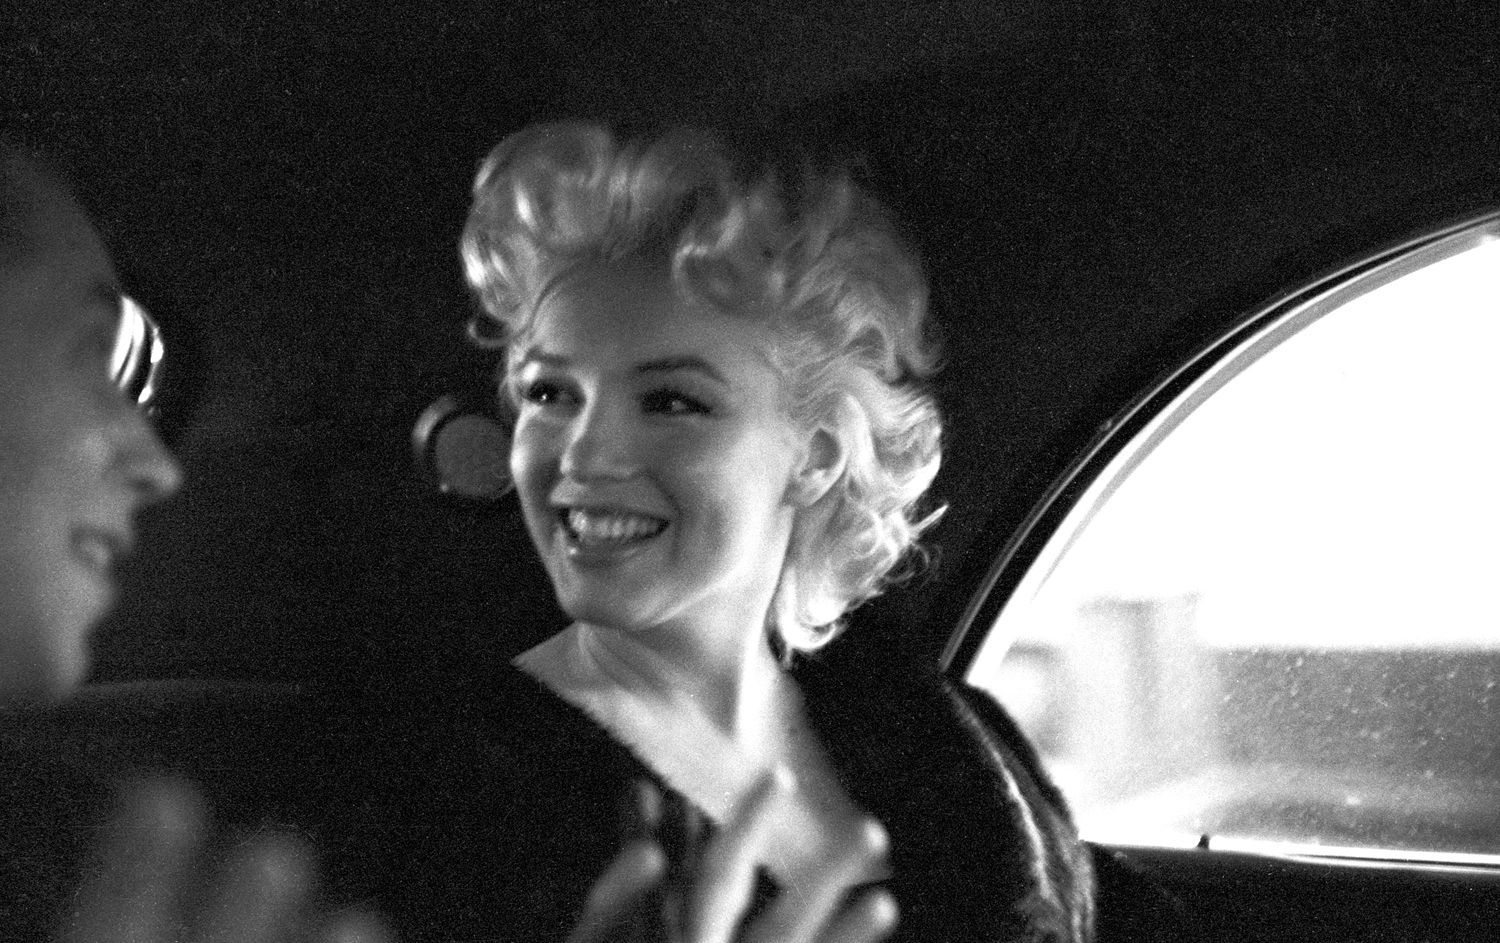 Actress Marilyn Monroe rides in the back of a car with Dick Shepherd on March 30, 1955 in New York City.